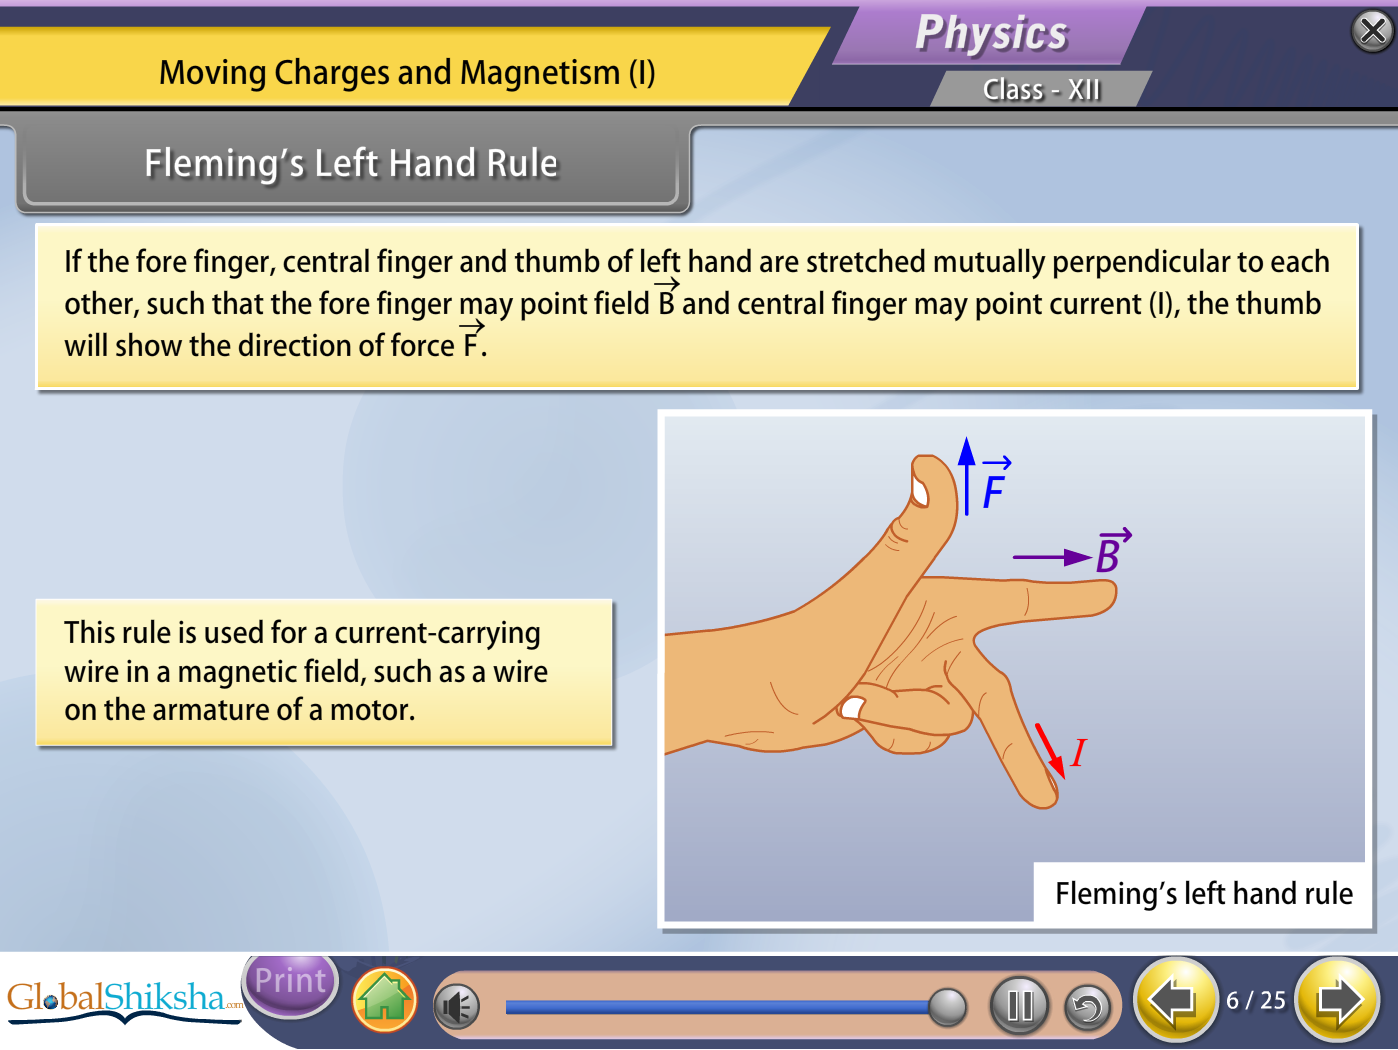 CBSE Class 12 PCMB Physics, Chemistry, Maths & Biology Animated Pendrive in English